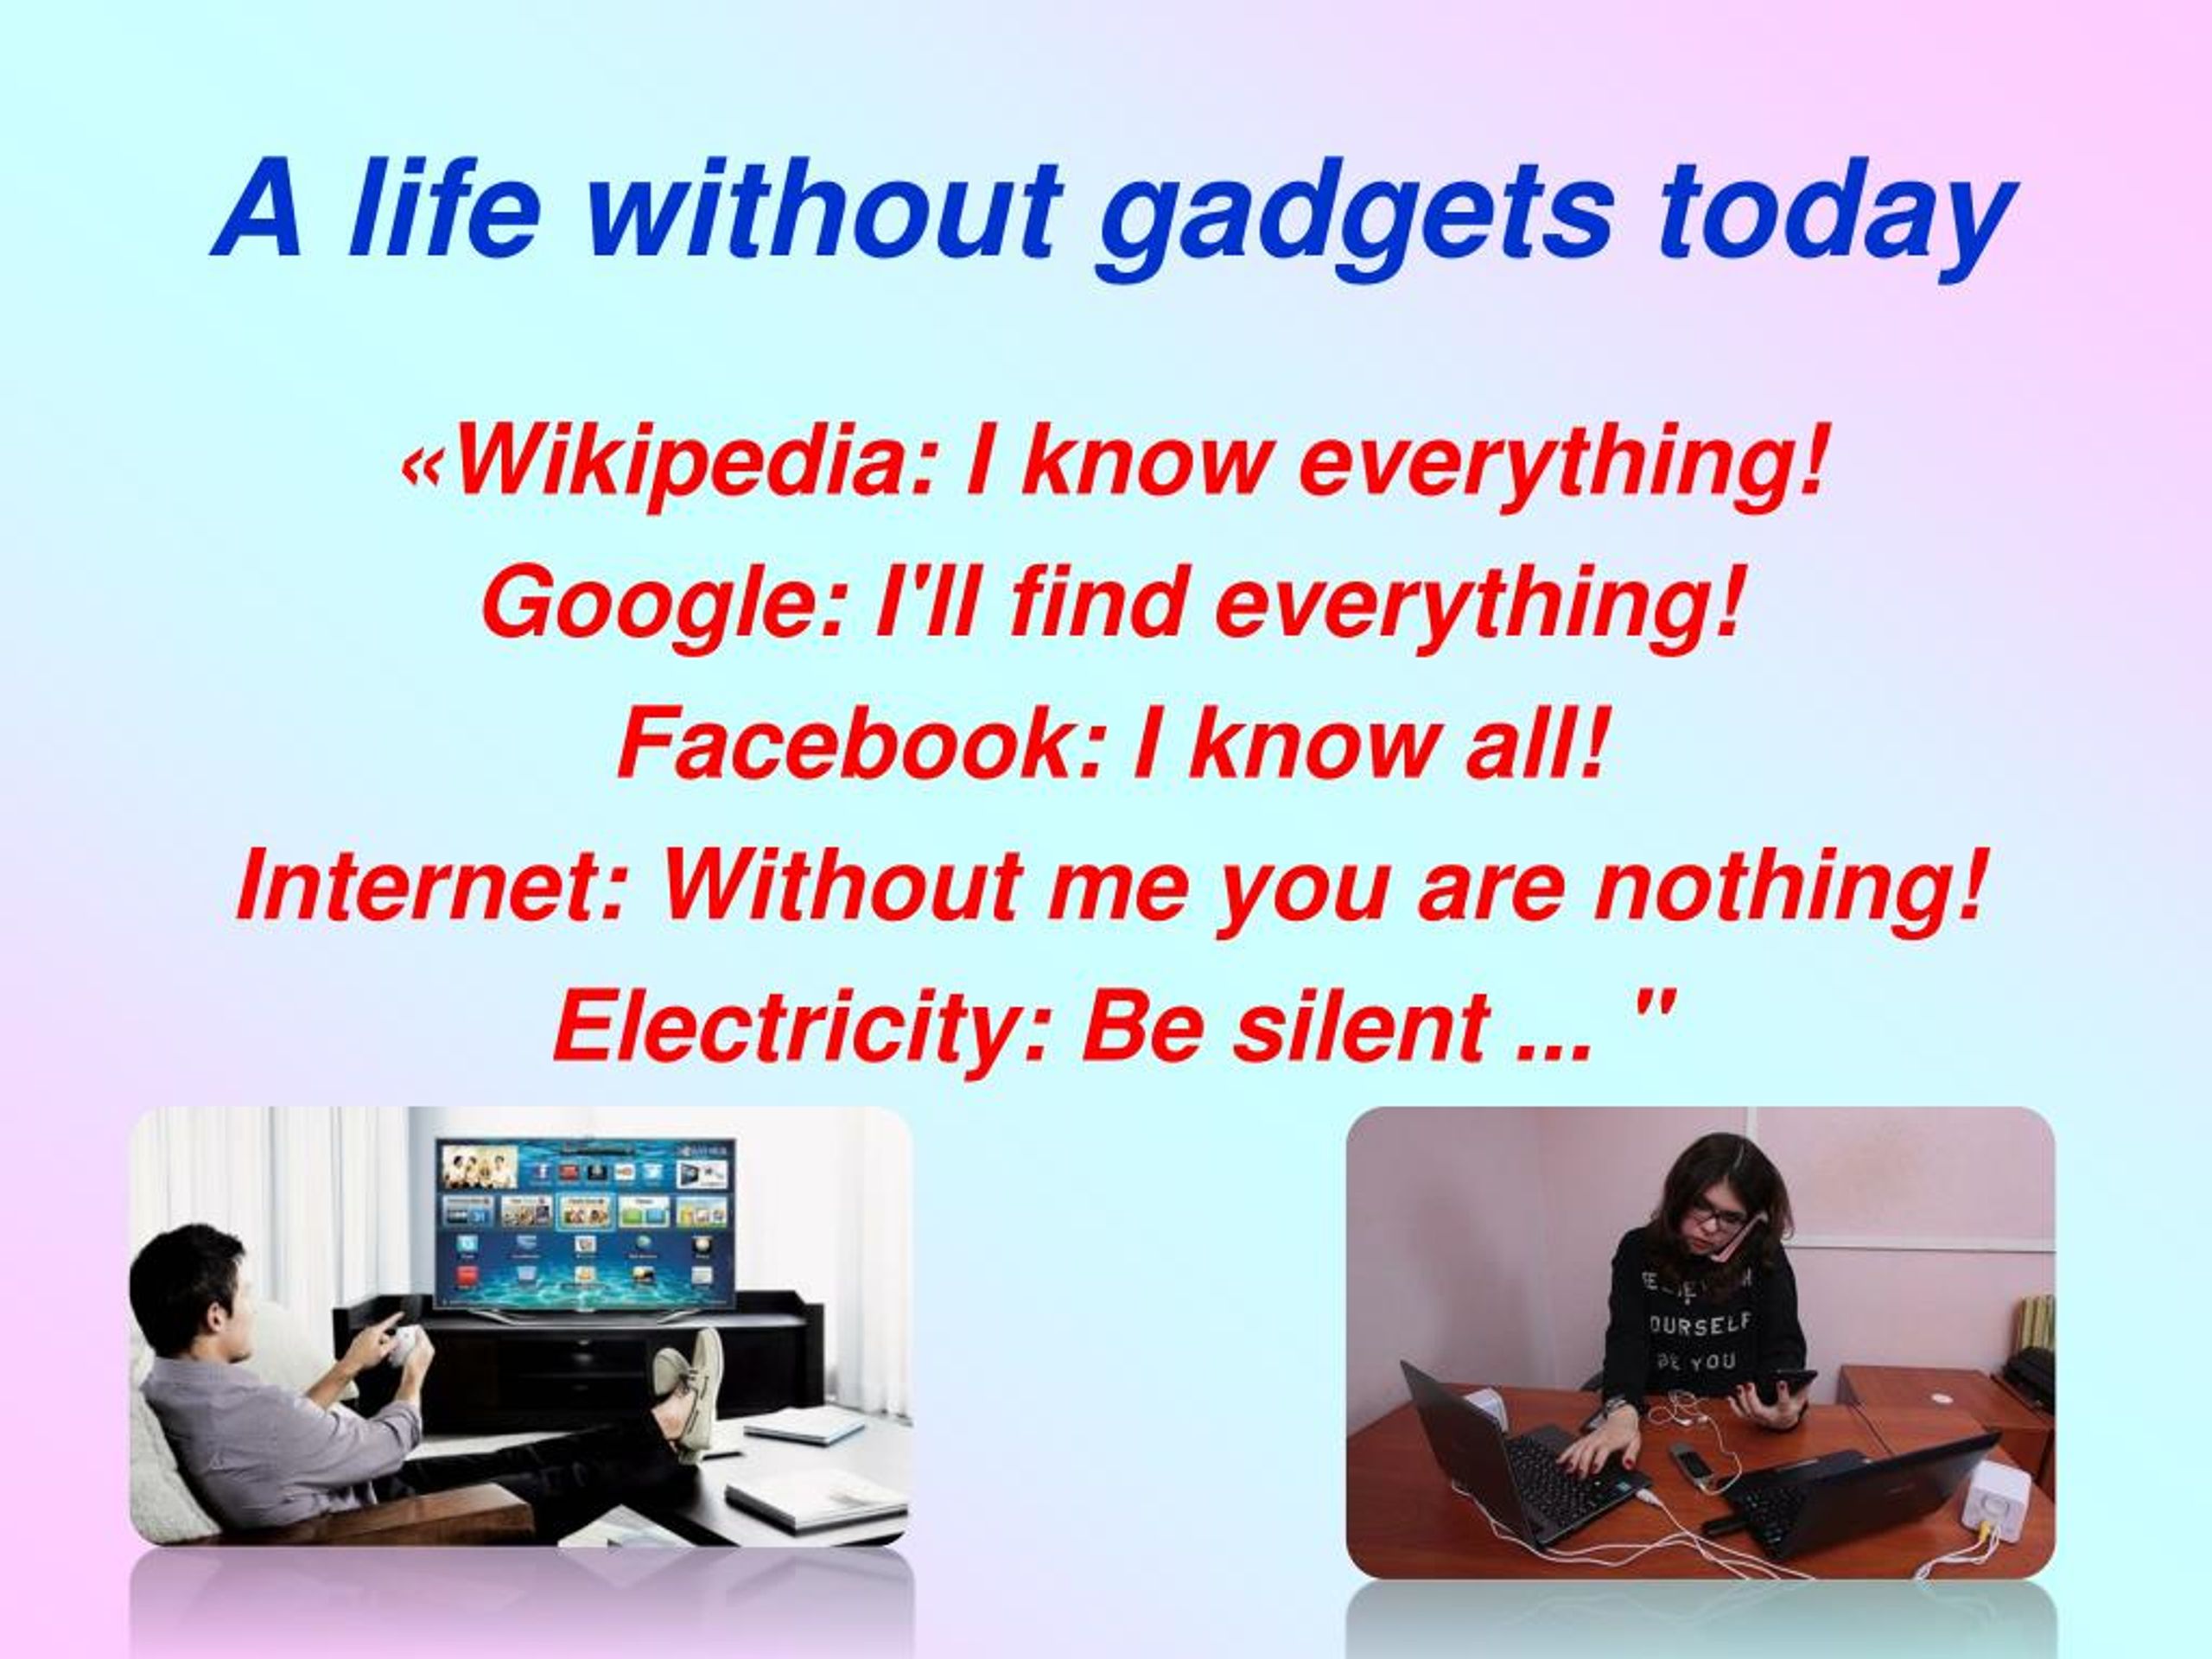 https://image4.slideserve.com/7311288/a-life-without-gadgets-today-l.jpg